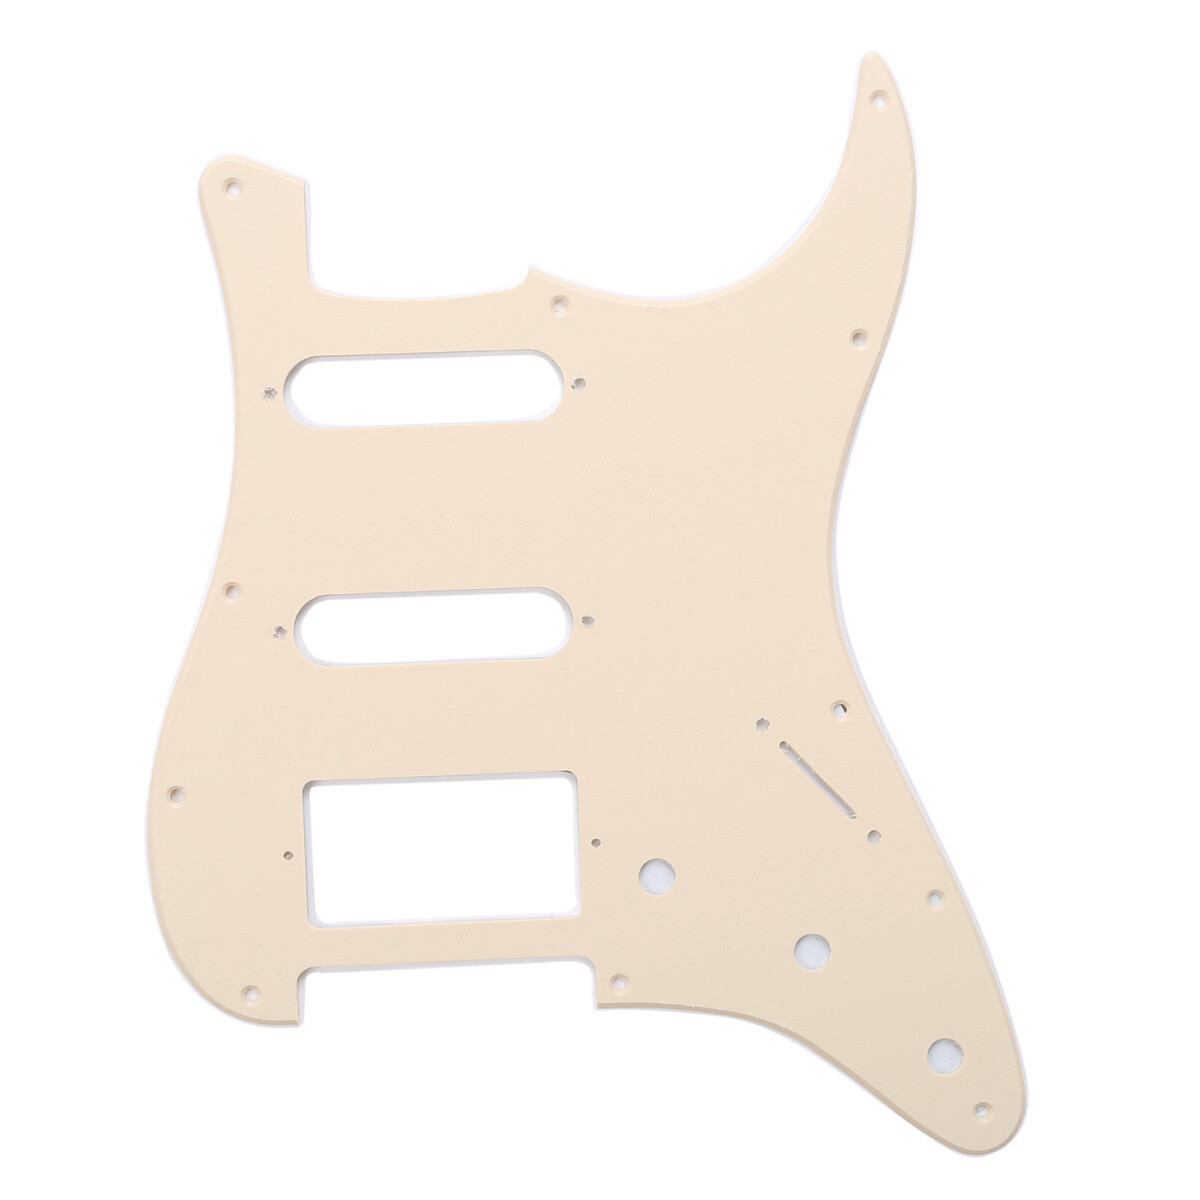 11 Hole Strat Pickguard for Fender US/Mexico Made Standard Stratocaster Modern Style, 1 Ply Cream